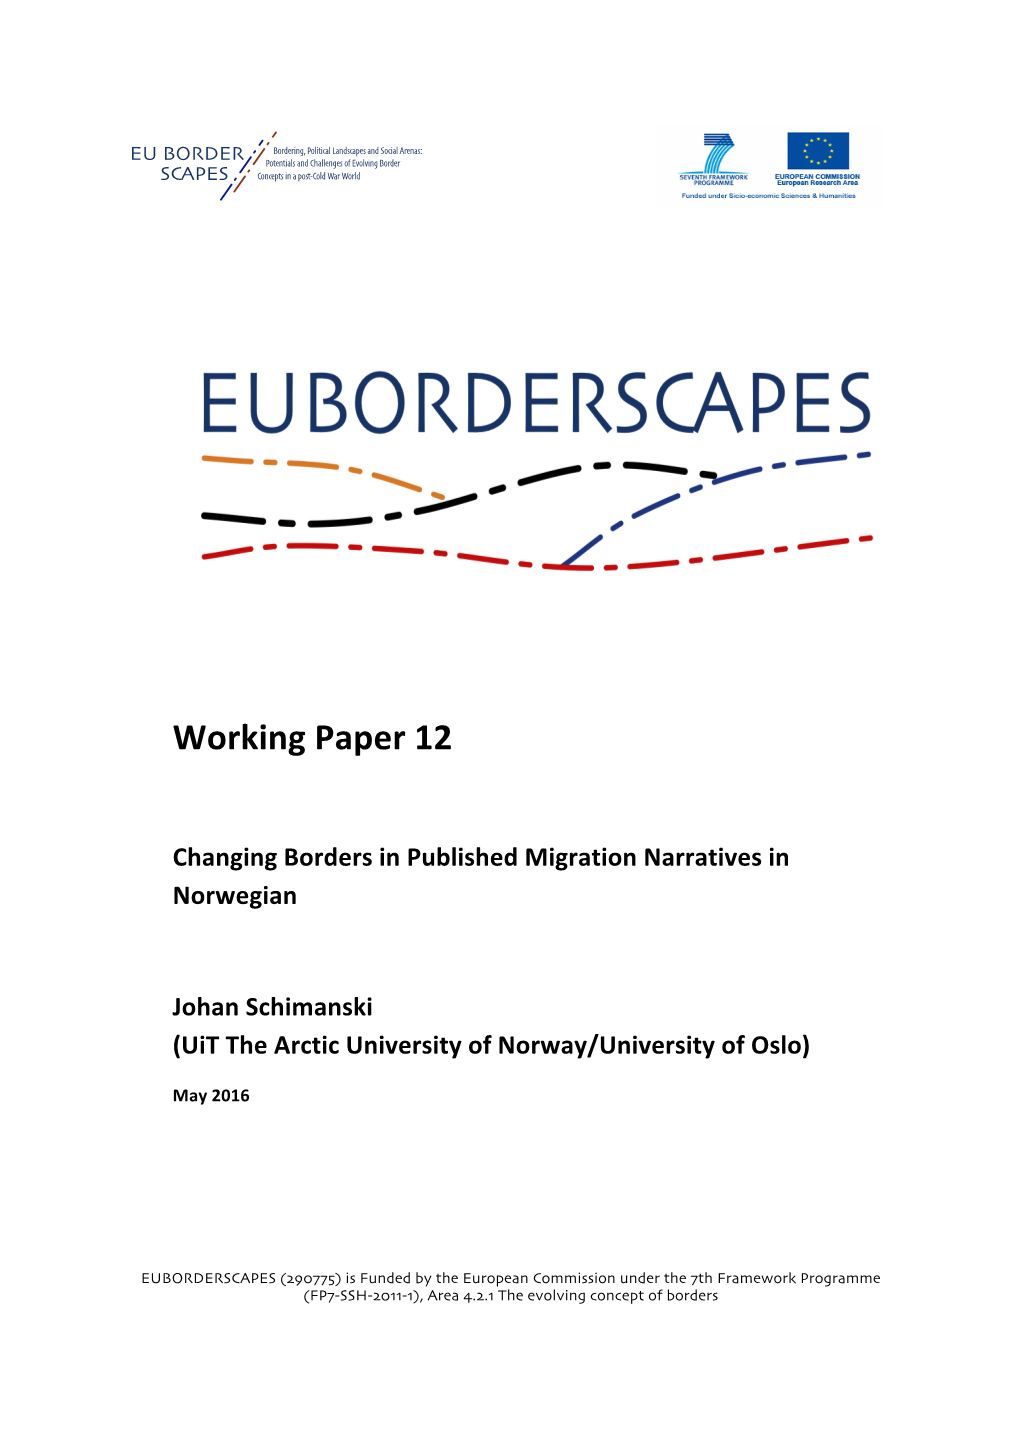 Changing Borders in Published Migration Narratives in Norwegian